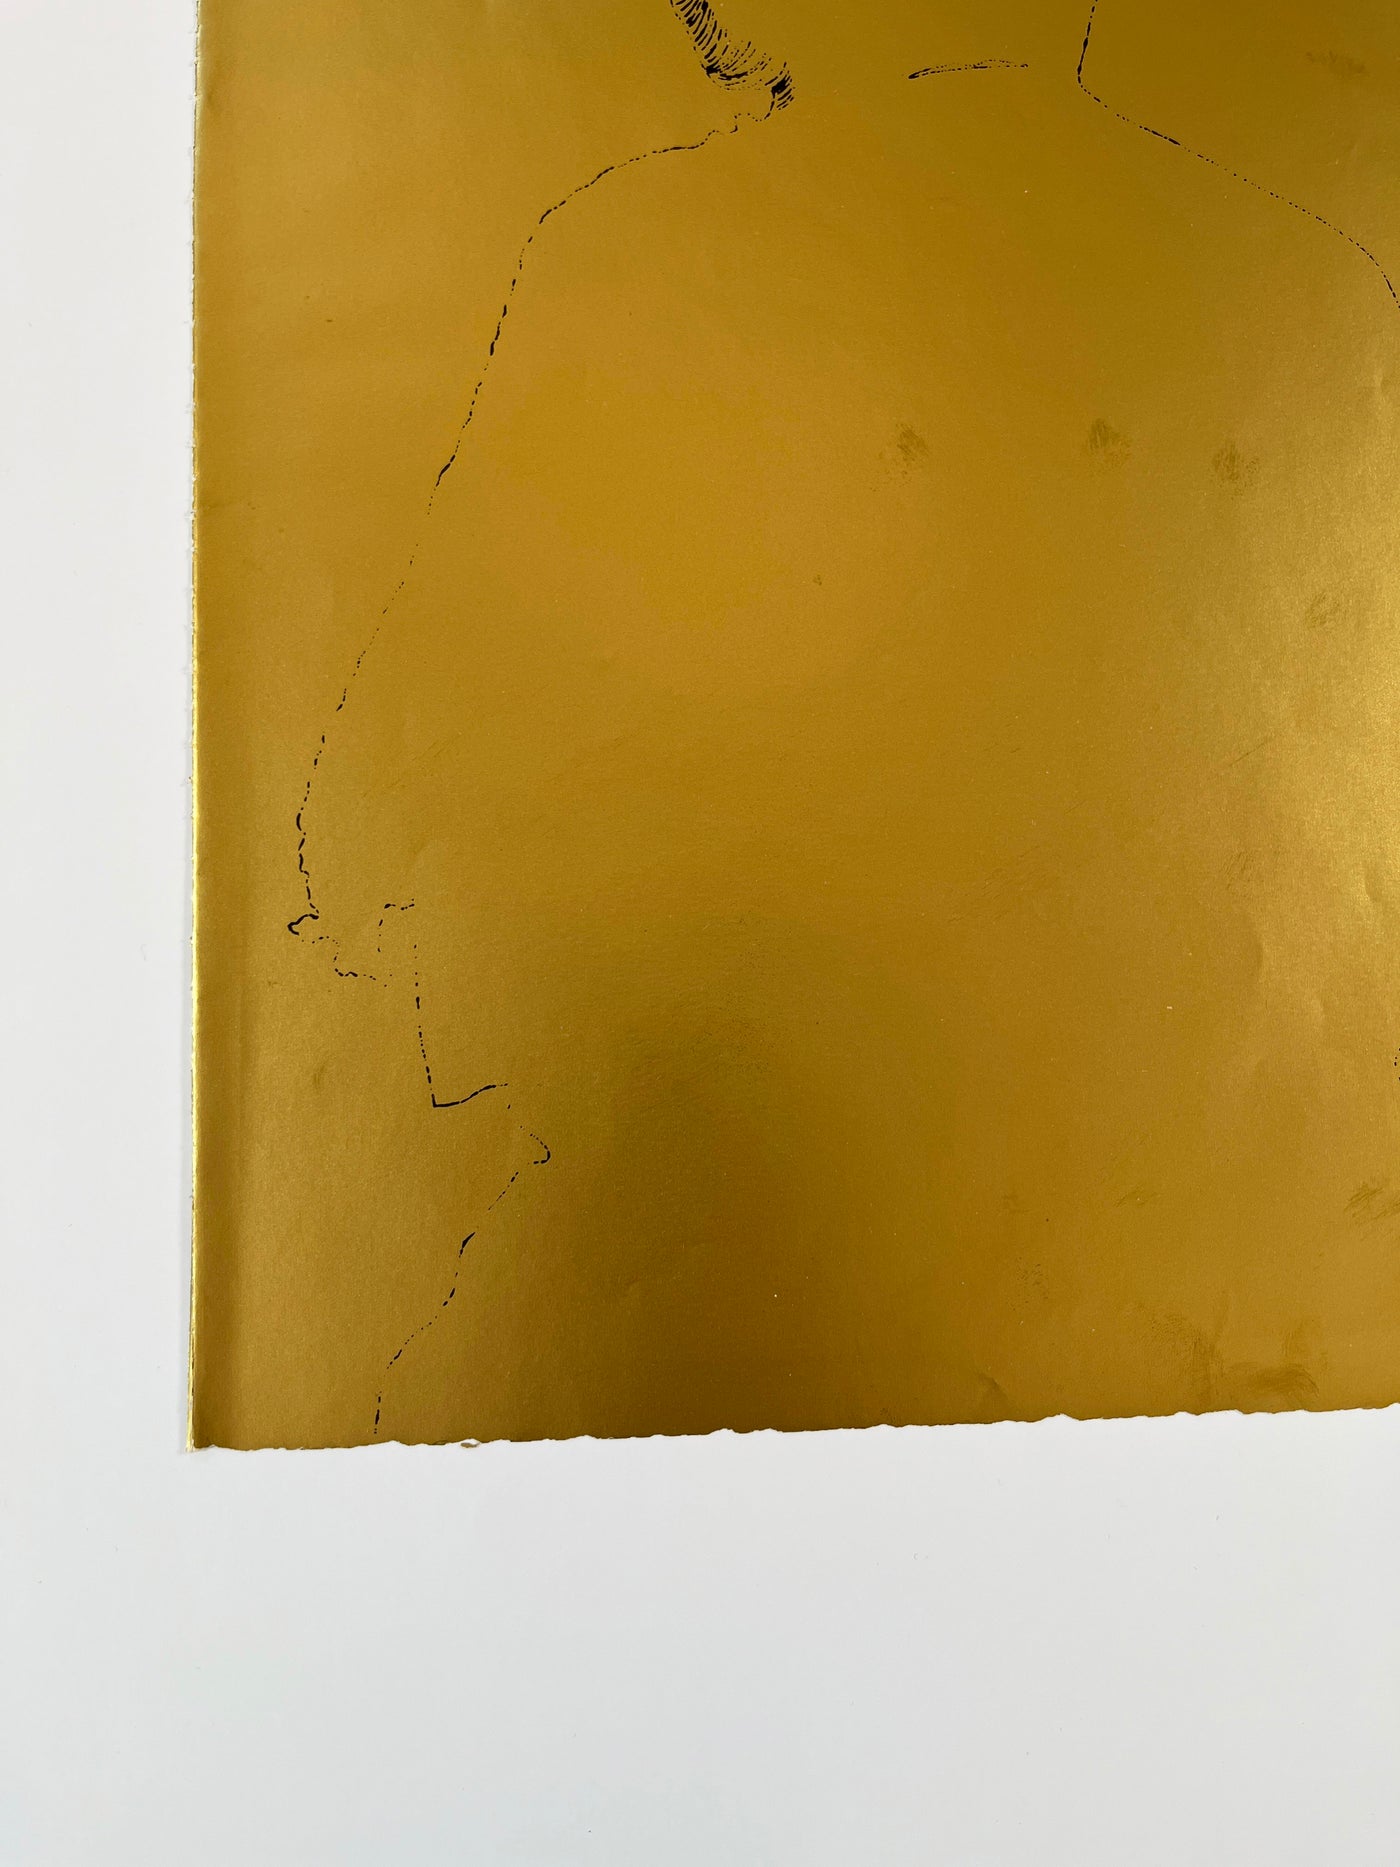 Andy Warhol, 'A Gold Book IV.113', 1957